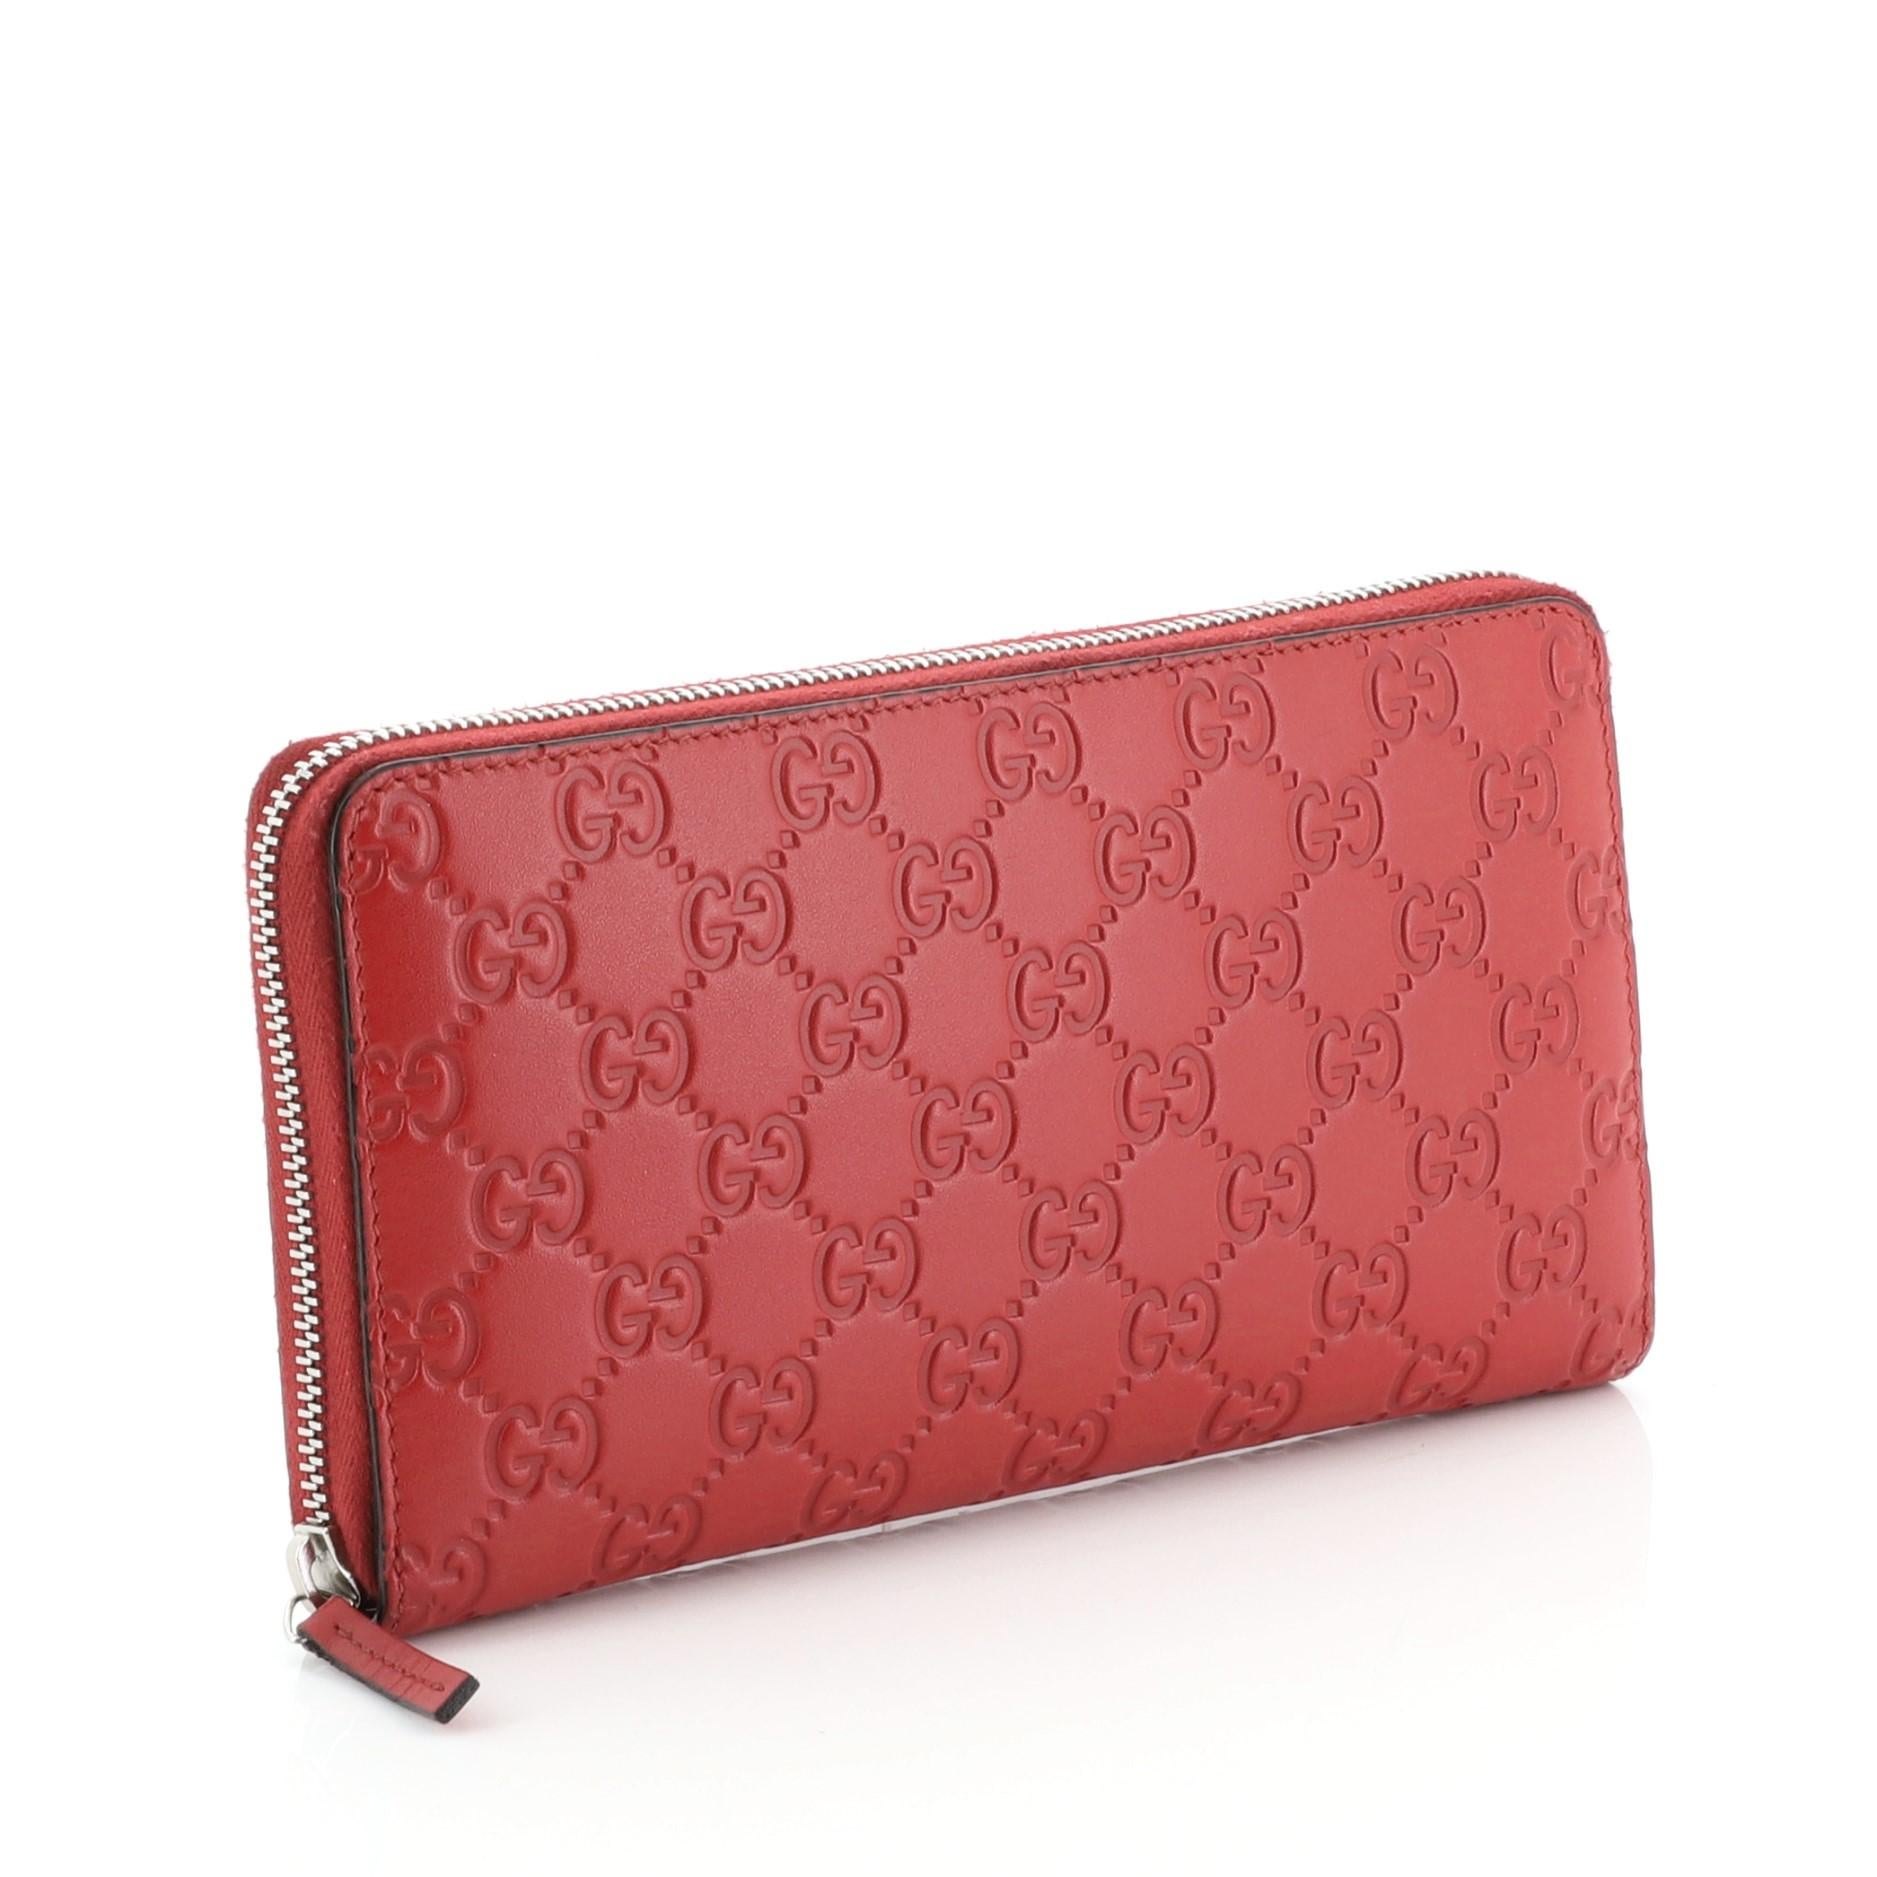 This Gucci Signature Zip Around Wallet Guccissima Leather, crafted in red leather, features silver-tone hardware. Its zip closure opens to a red leather interior with multiple card slots and zip pocket. 

Estimated Retail Price: $630
Condition: